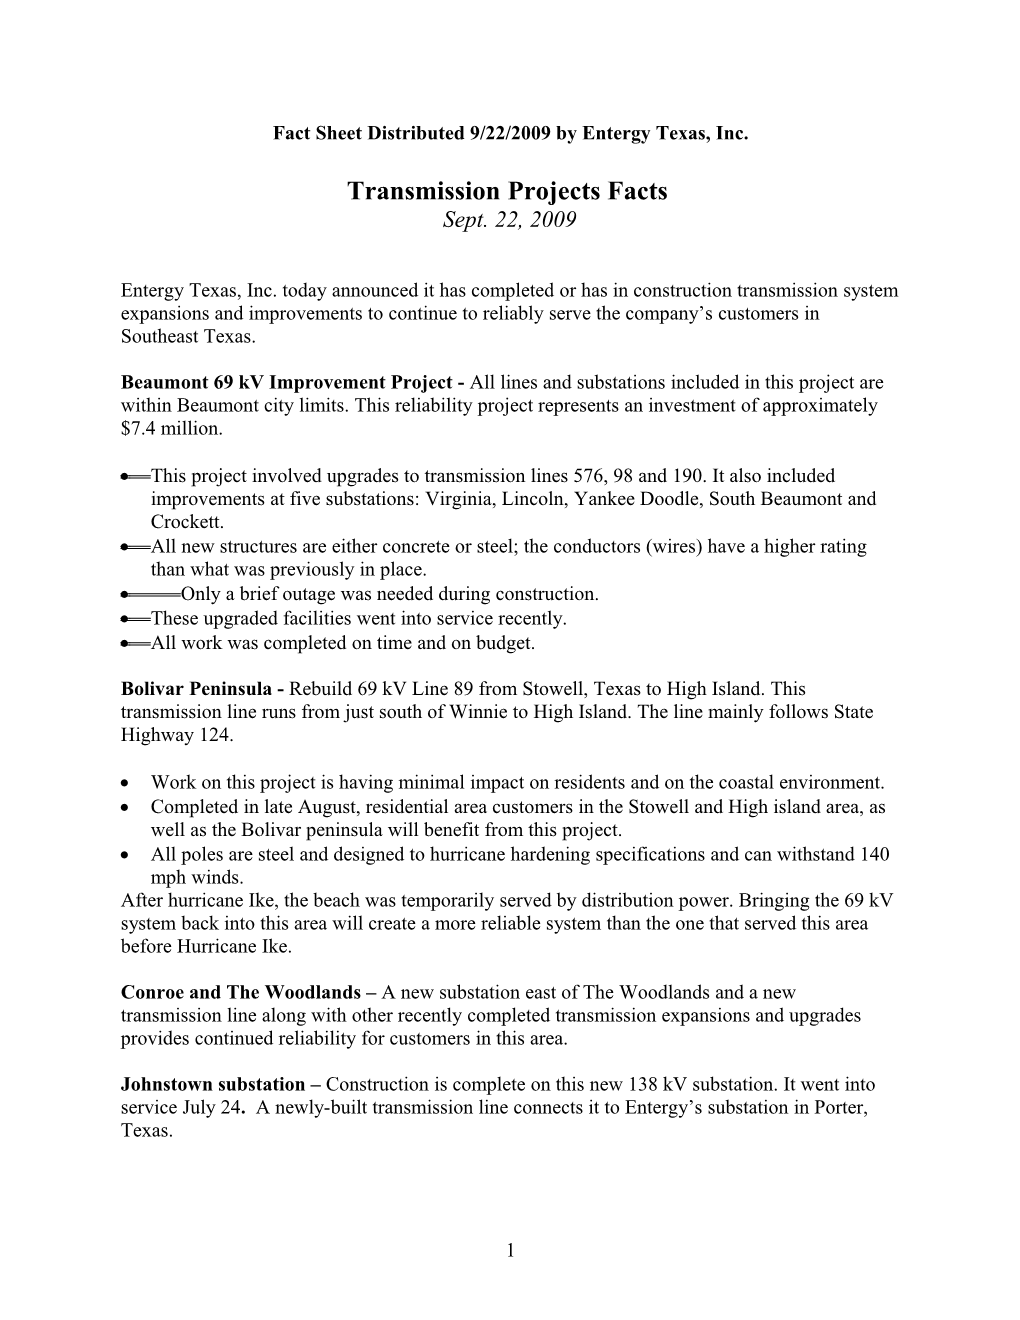 Transmission Projects Facts